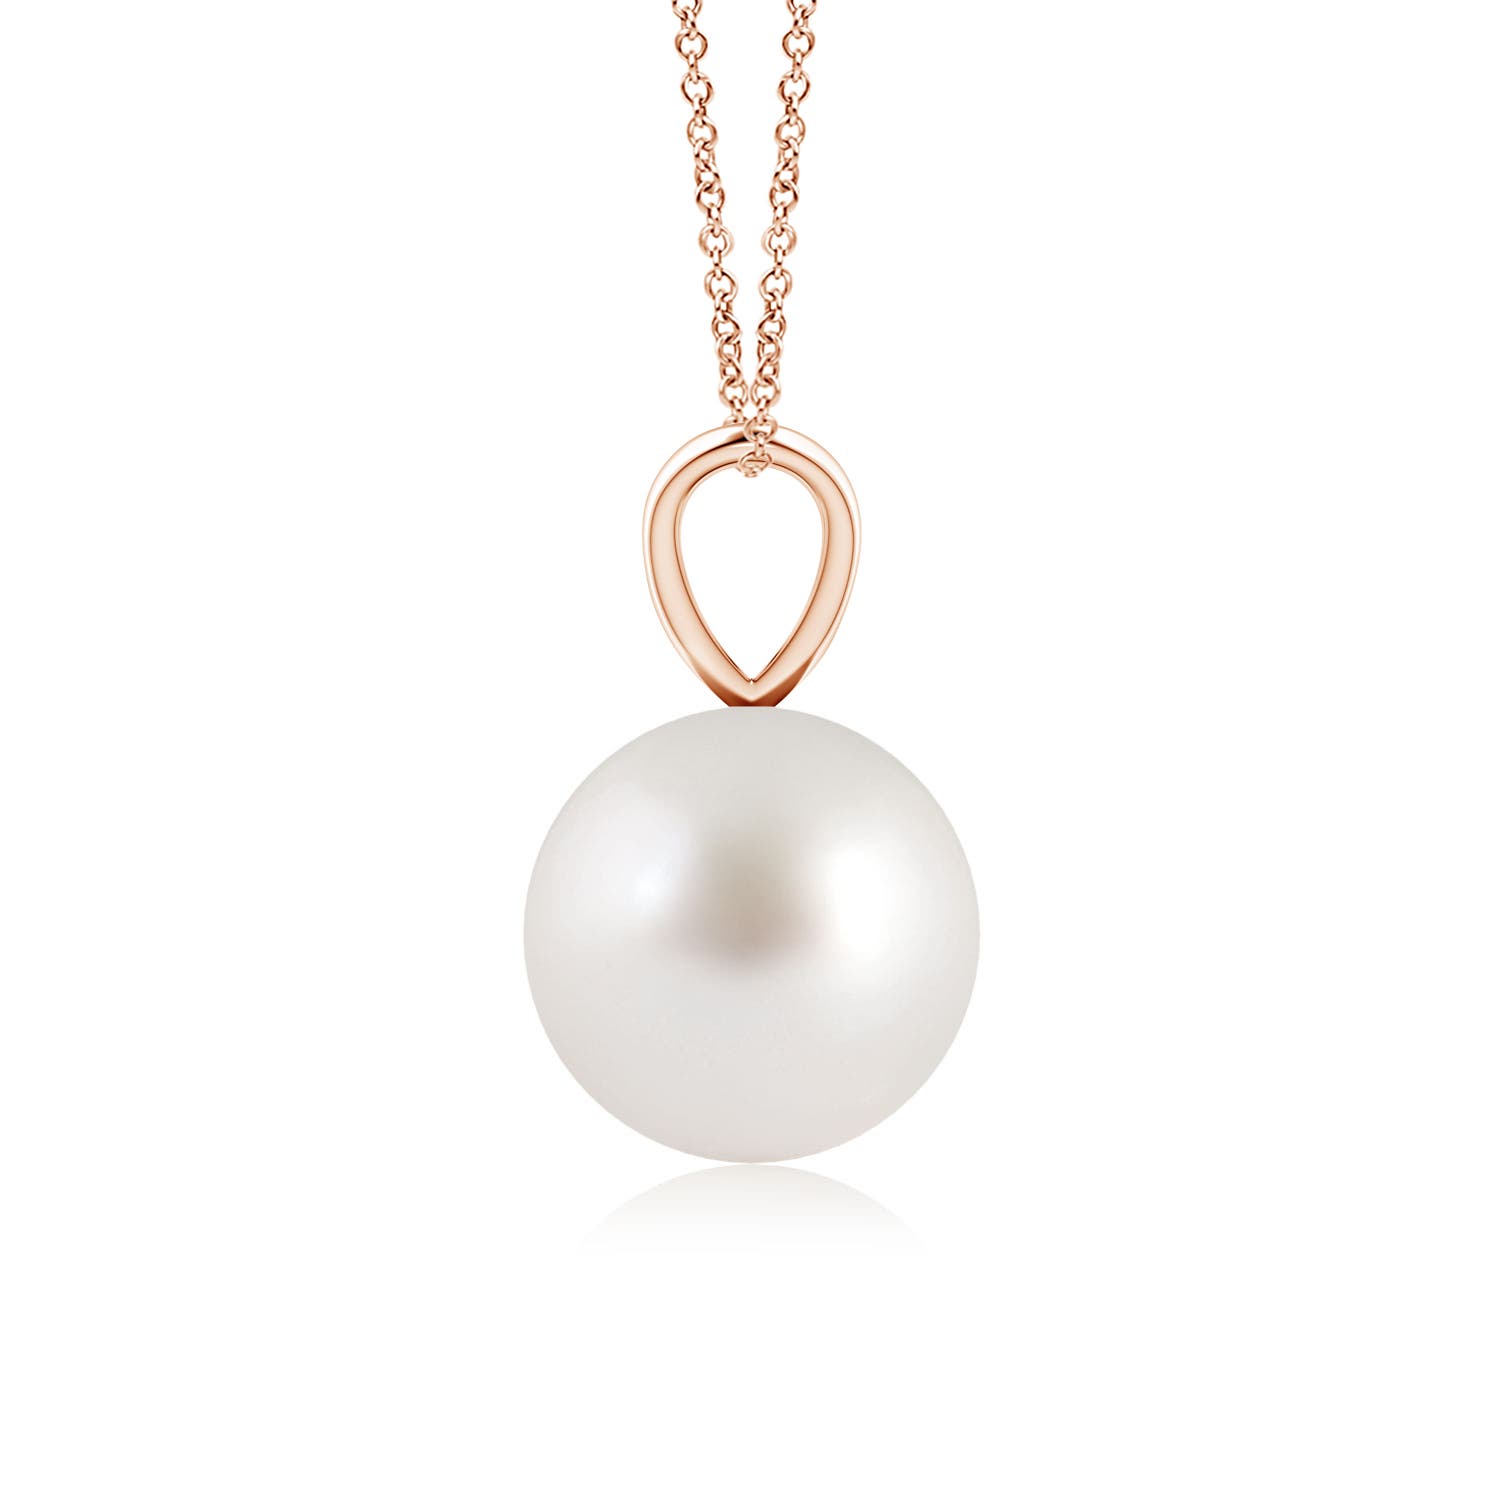 AAA - South Sea Cultured Pearl / 3.7 CT / 14 KT Rose Gold